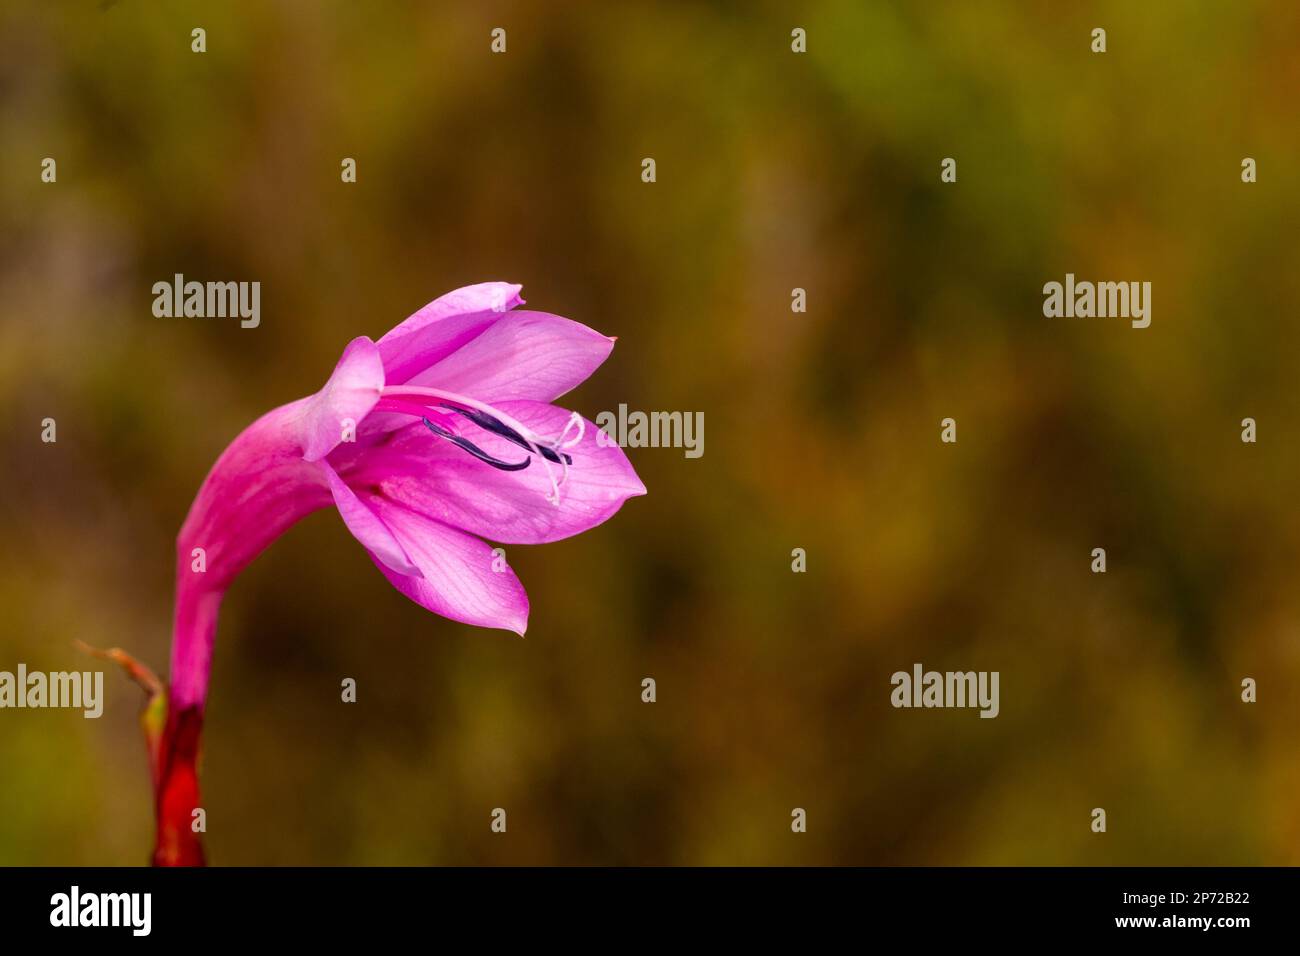 Single pink flower of a Watsonia sp. with copyspace Stock Photo